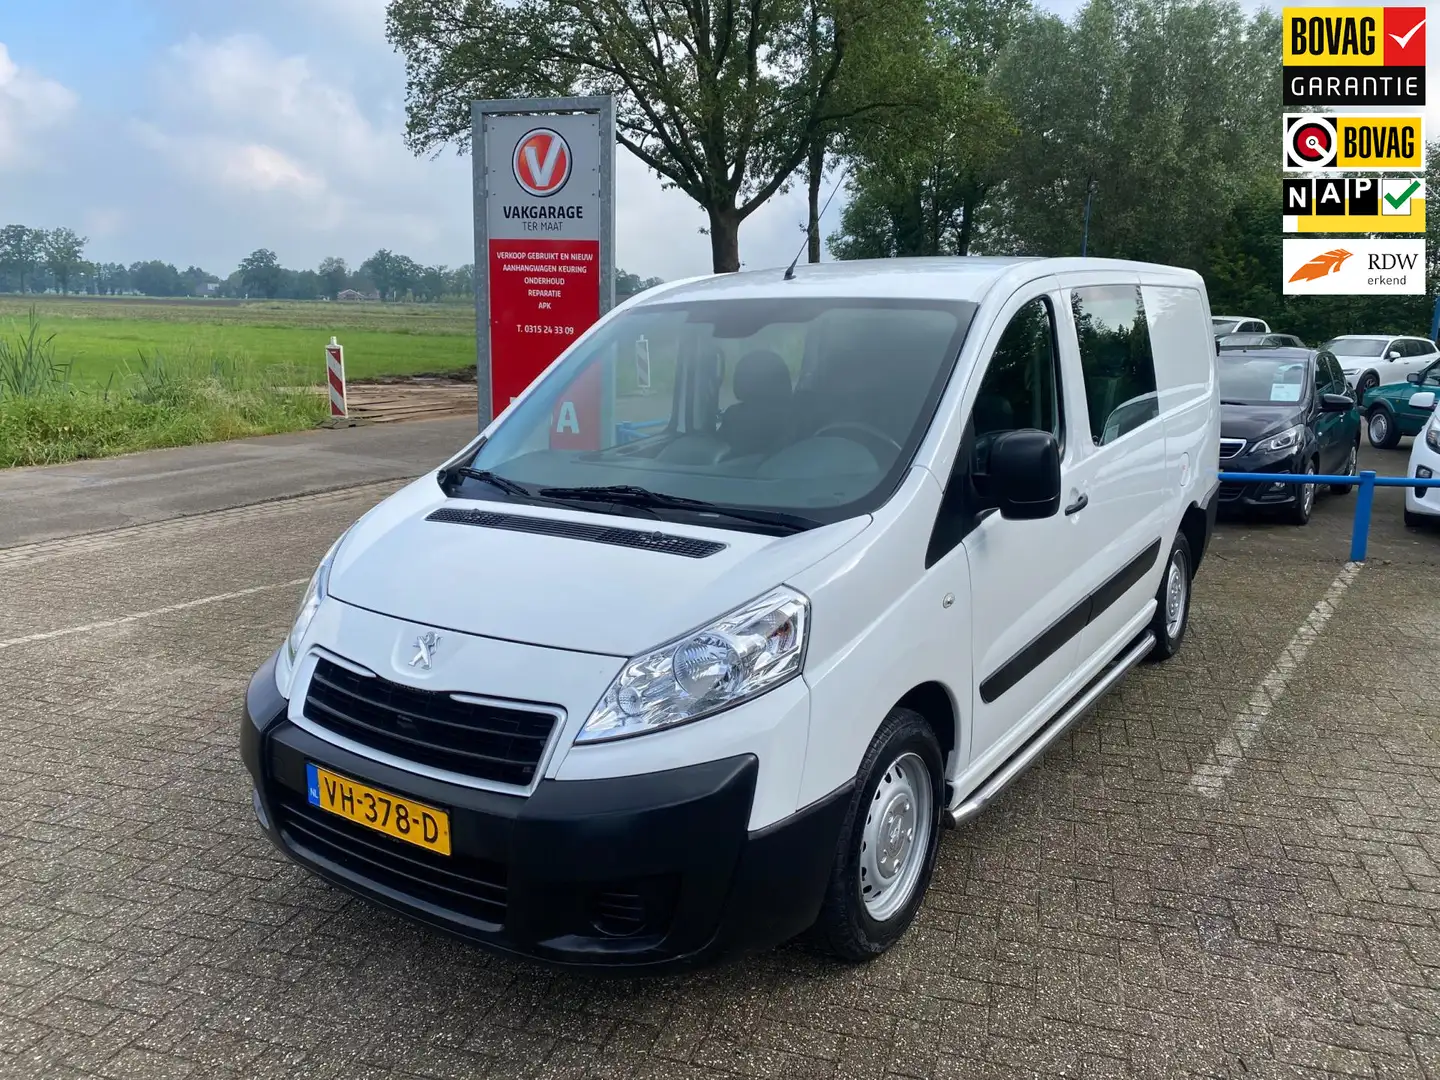 Peugeot Expert 229 2.0 HDI L2H1 DC Navteq 2 | Dubbele cabine | Or - 1